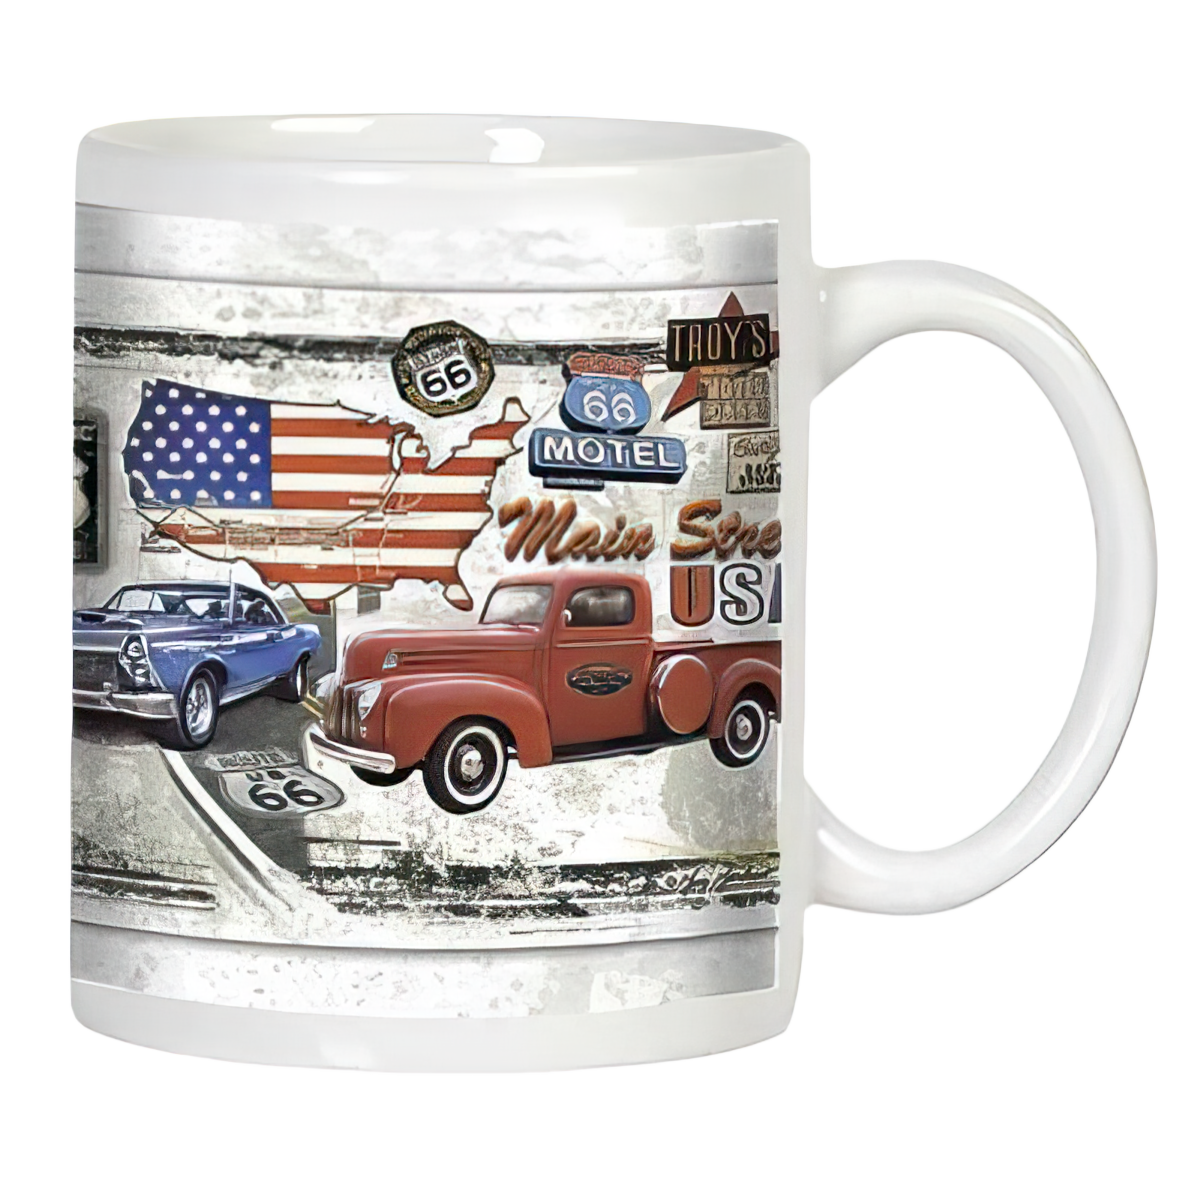 Route 66 design with red pickup and blue car